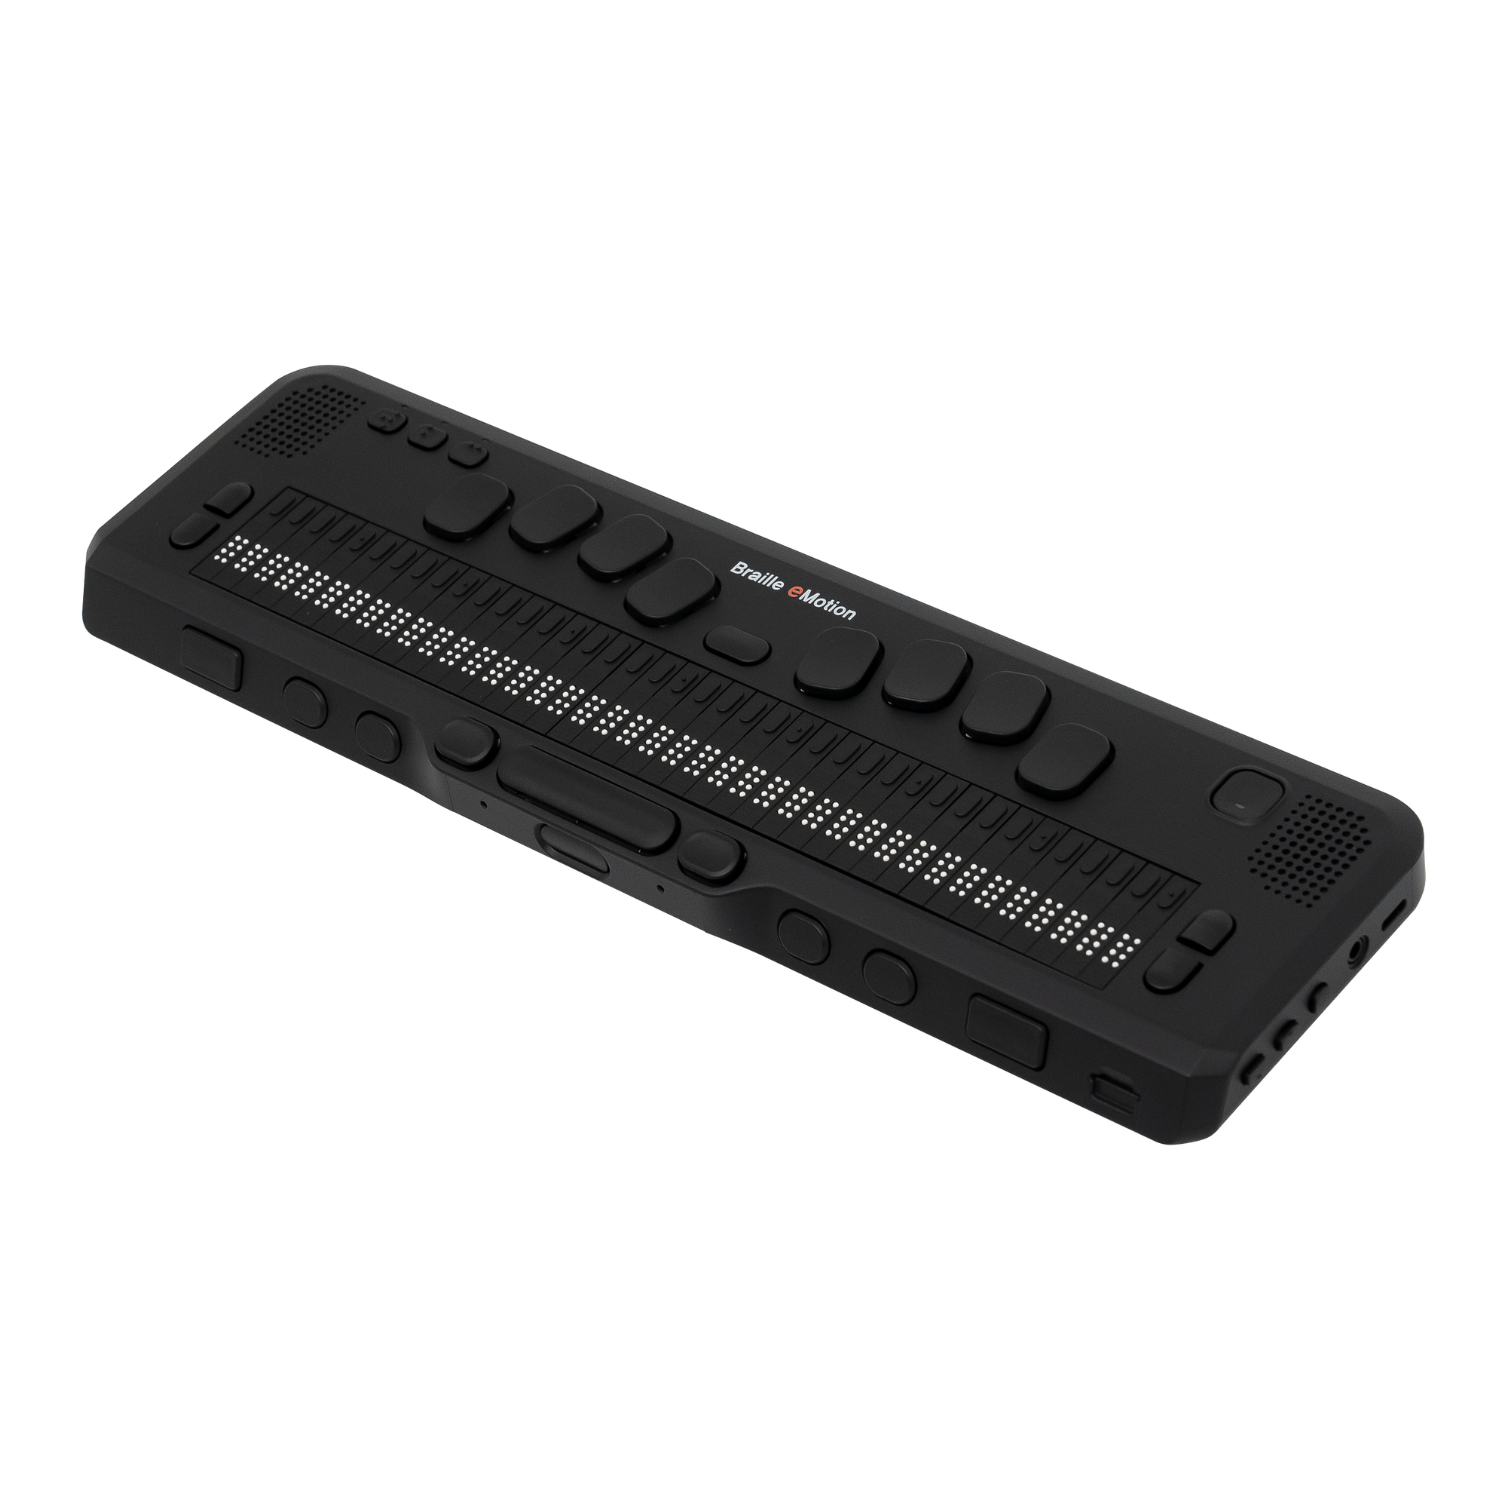 Image of the Braille eMotion 40 notetaker and braille display from HIMS.